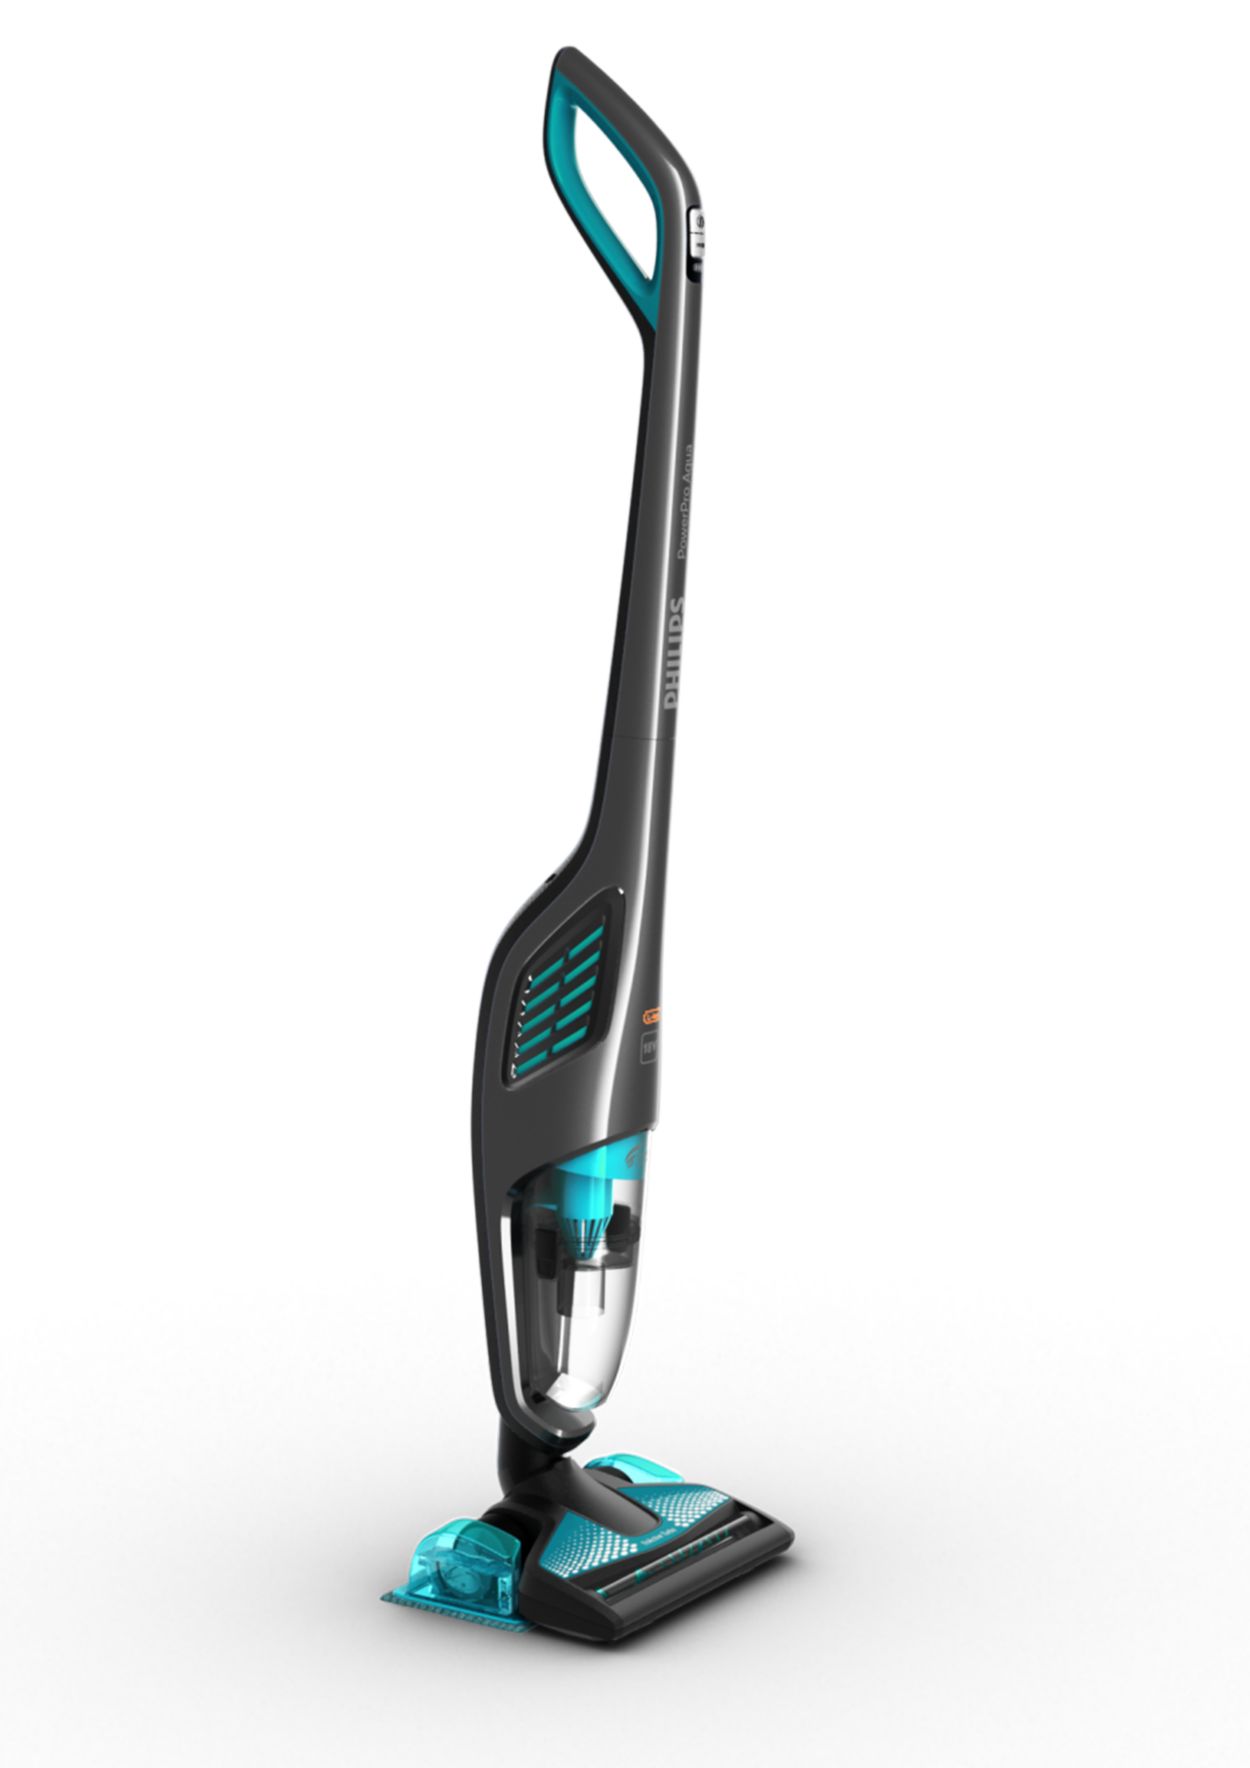 Powerpro Aqua 2 In 1 Wet And Dry Cordless Vacuum Cleaner And Mop Fc6402